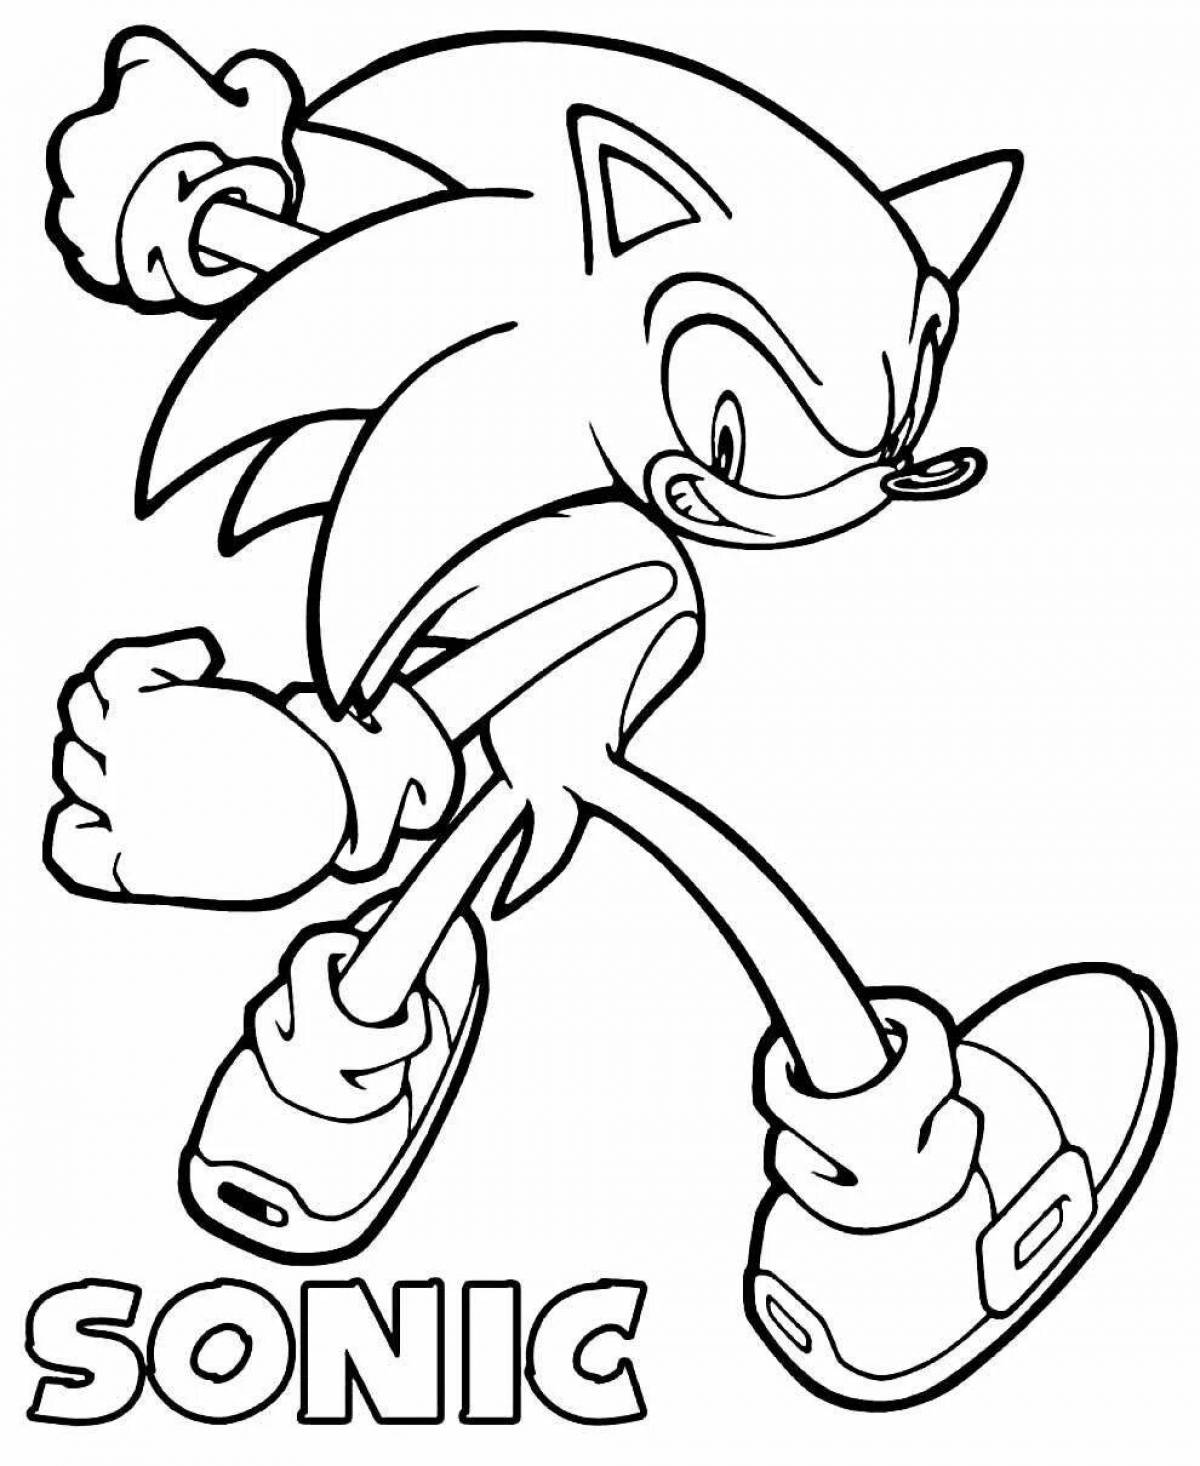 Sonic prime fairytale coloring book